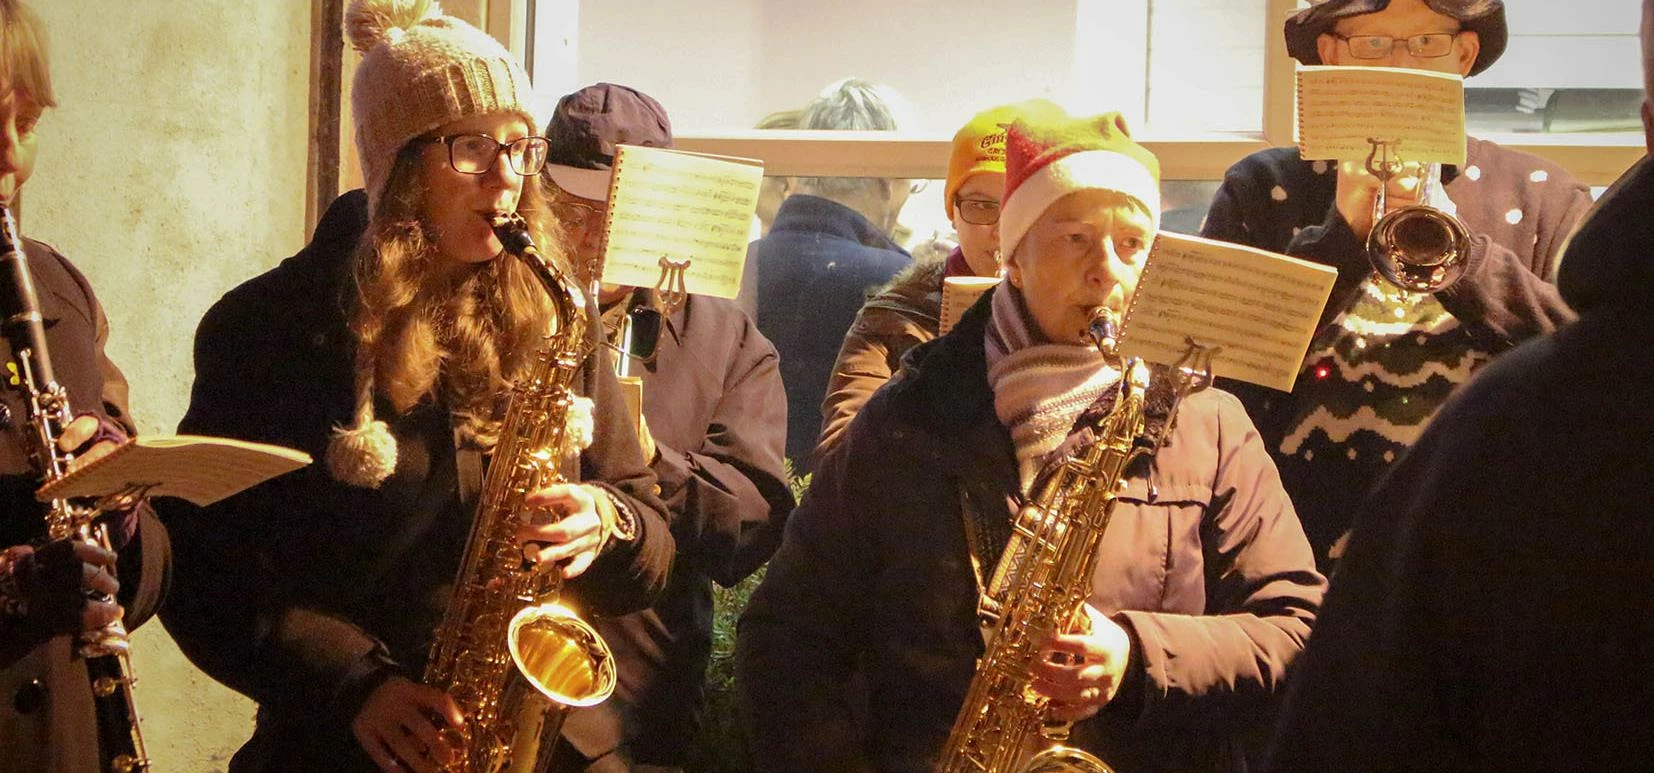 Entertainment at the Albrighton Christmas Extravaganza (pic courtesy of Vicky Andrews)